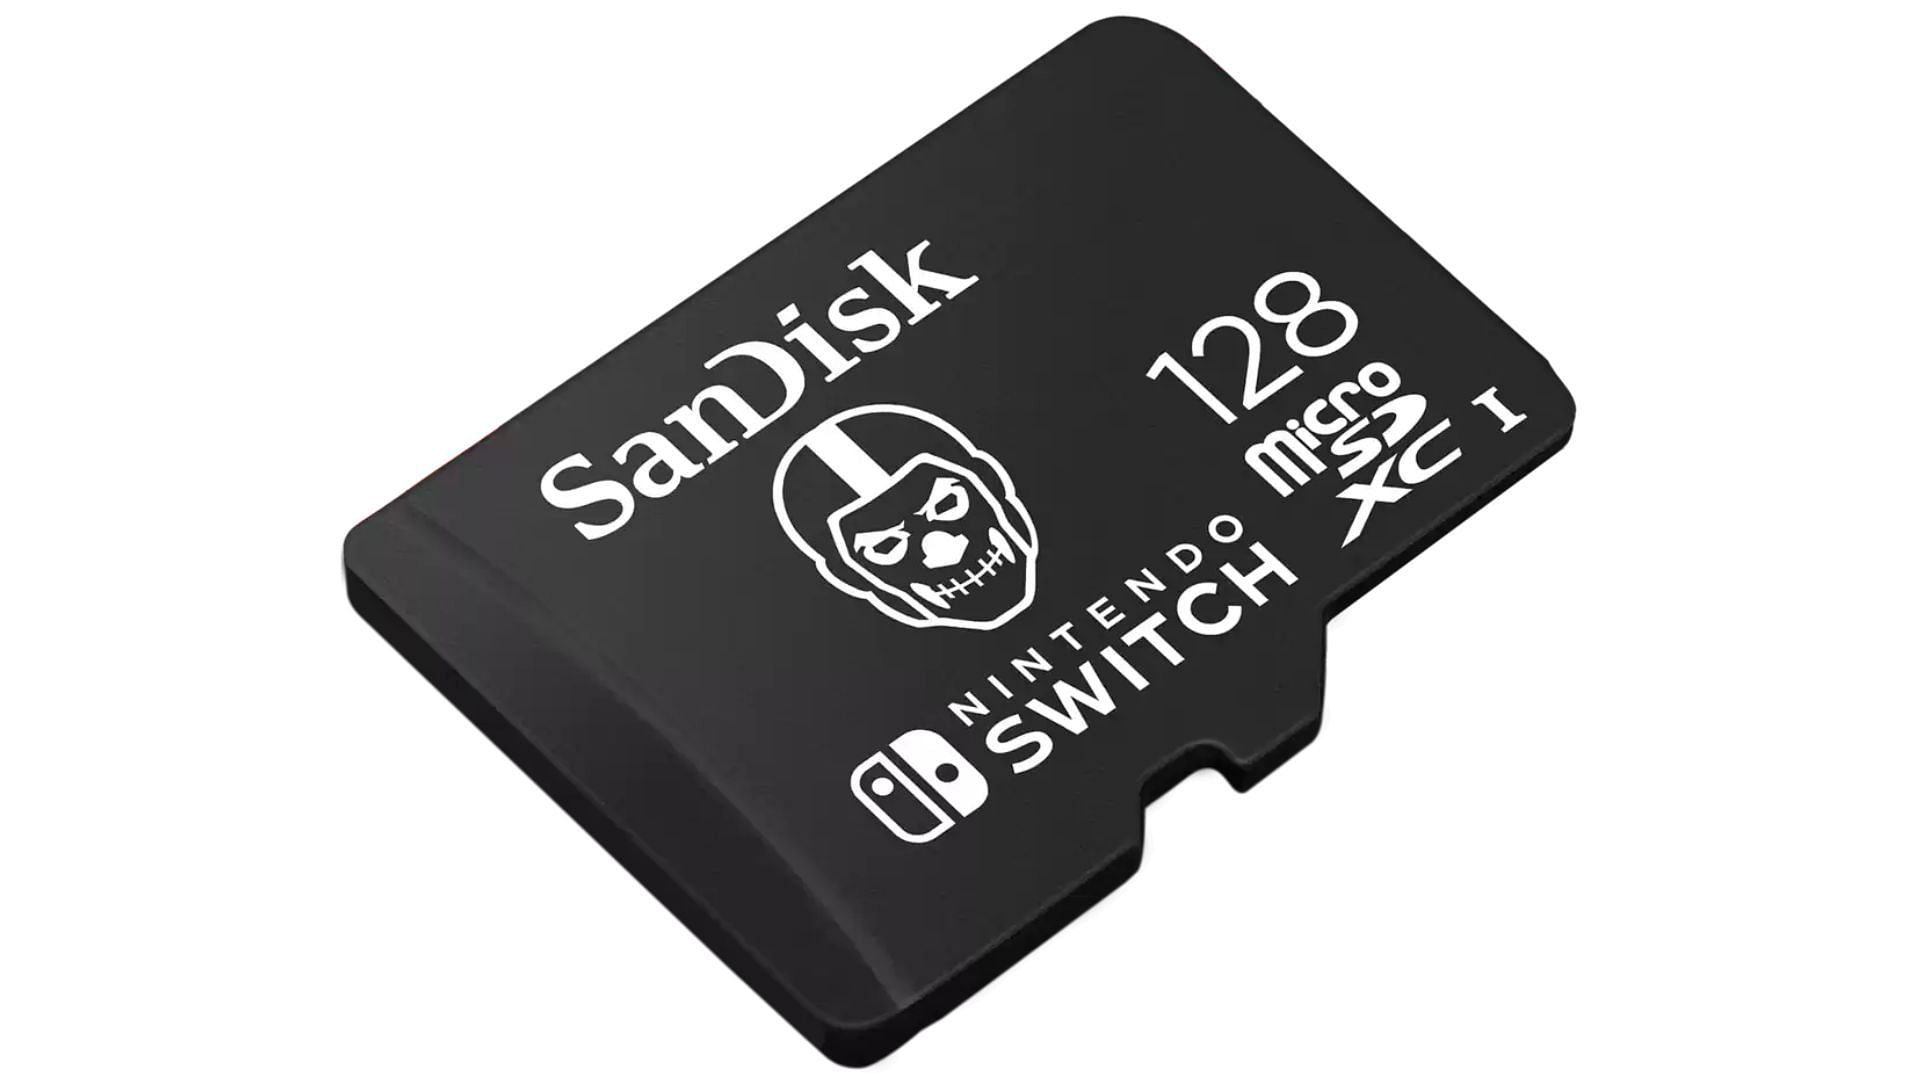 The Skull Candy variant of the special edition SanDisk memory cards (Image via Western Digital)